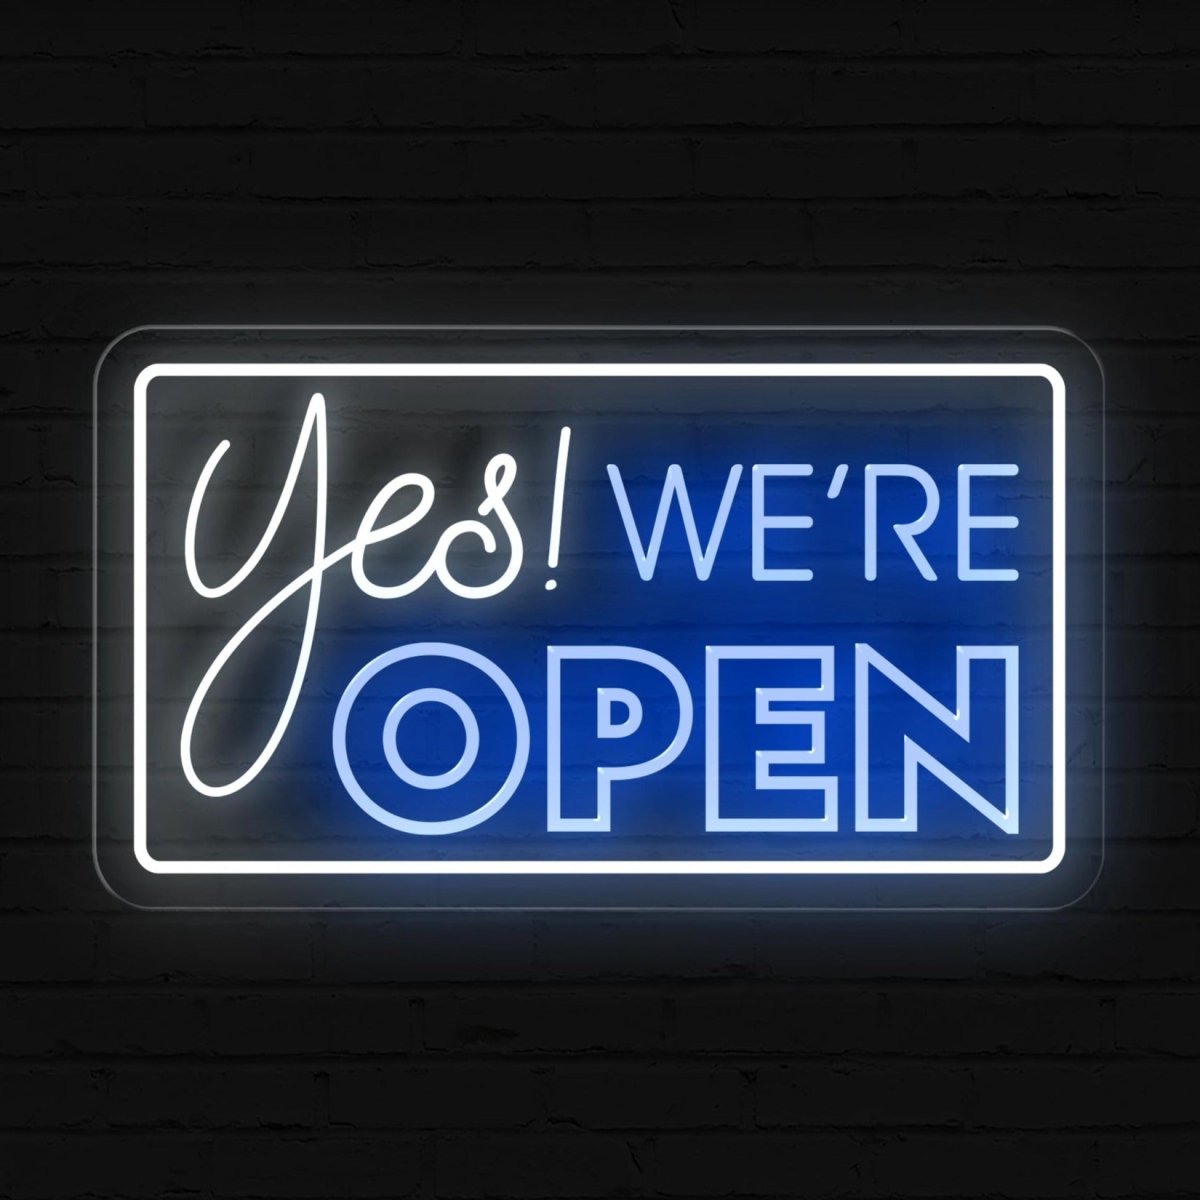 Yes Were Open Neon Sign Bright Led Light Welcome For Your Business